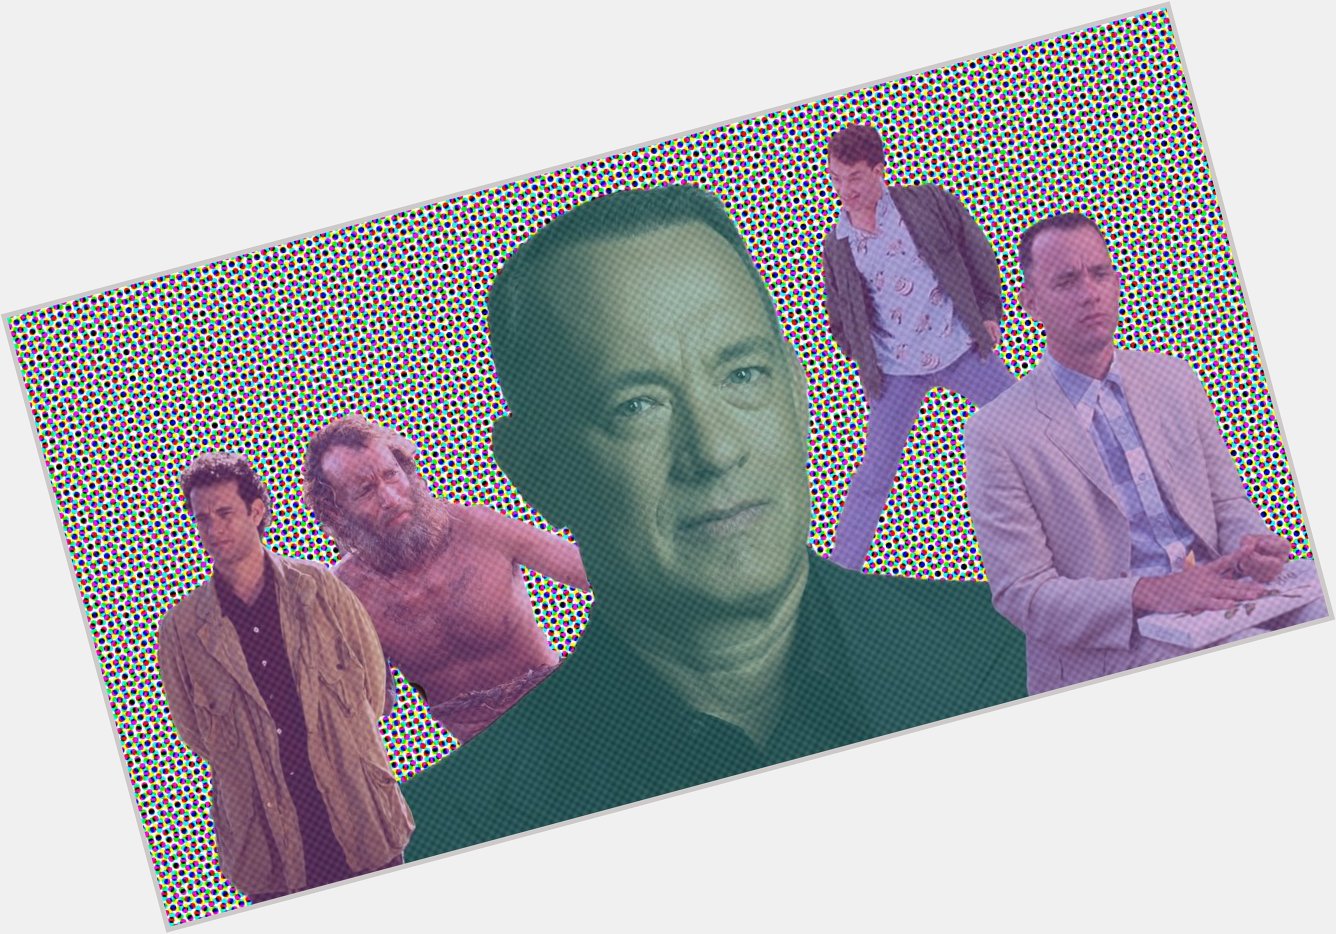 Happy Birthday Tom Hanks! What s your favorite movie he s played in? 